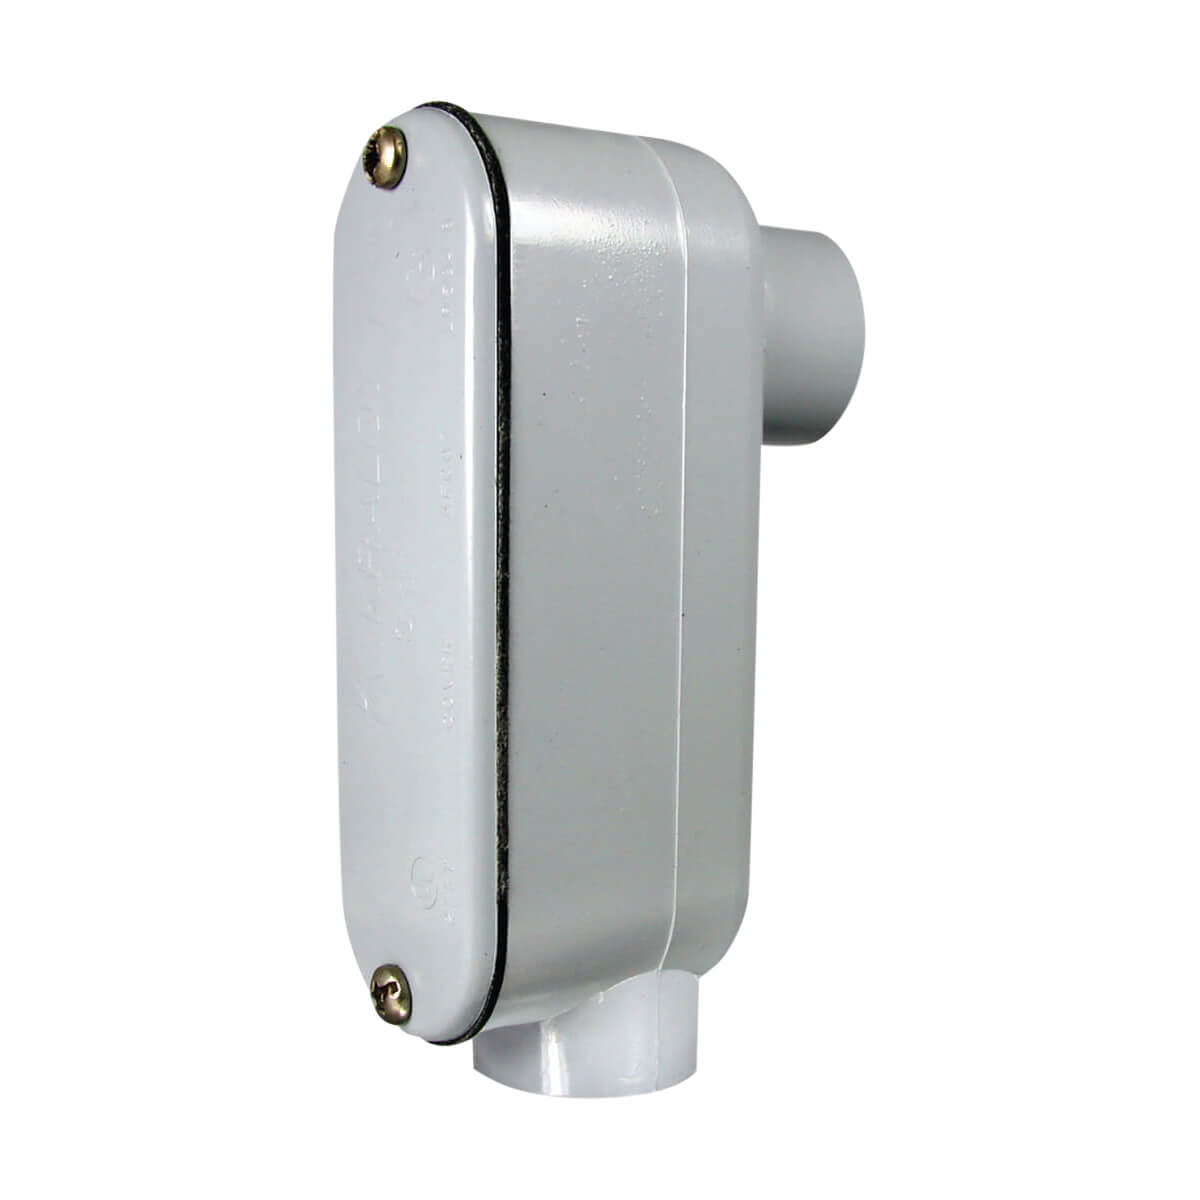 PVC Counduit Type 'LB' Access Fitting - Hub - 1-in